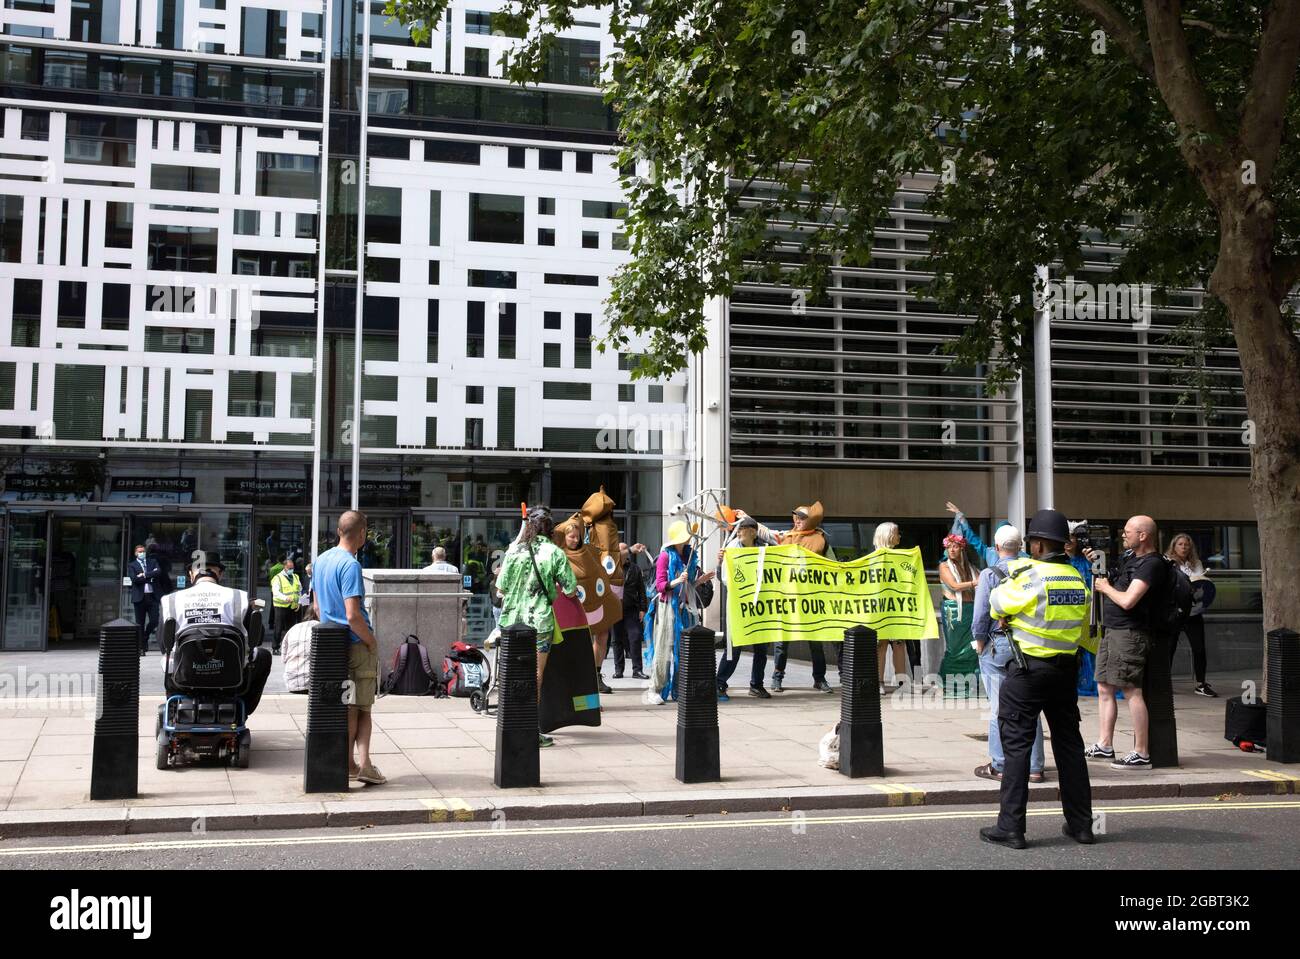 London, UK. 5th Aug, 2021. Members of Extinction Rebellion protest outside the Home Office and DEFRA. Members of Open water swimming and Angling groups protest against pollution in waterways.They want more action against global warming and the pollution of the rivers. Credit: Mark Thomas/Alamy Live News Stock Photo